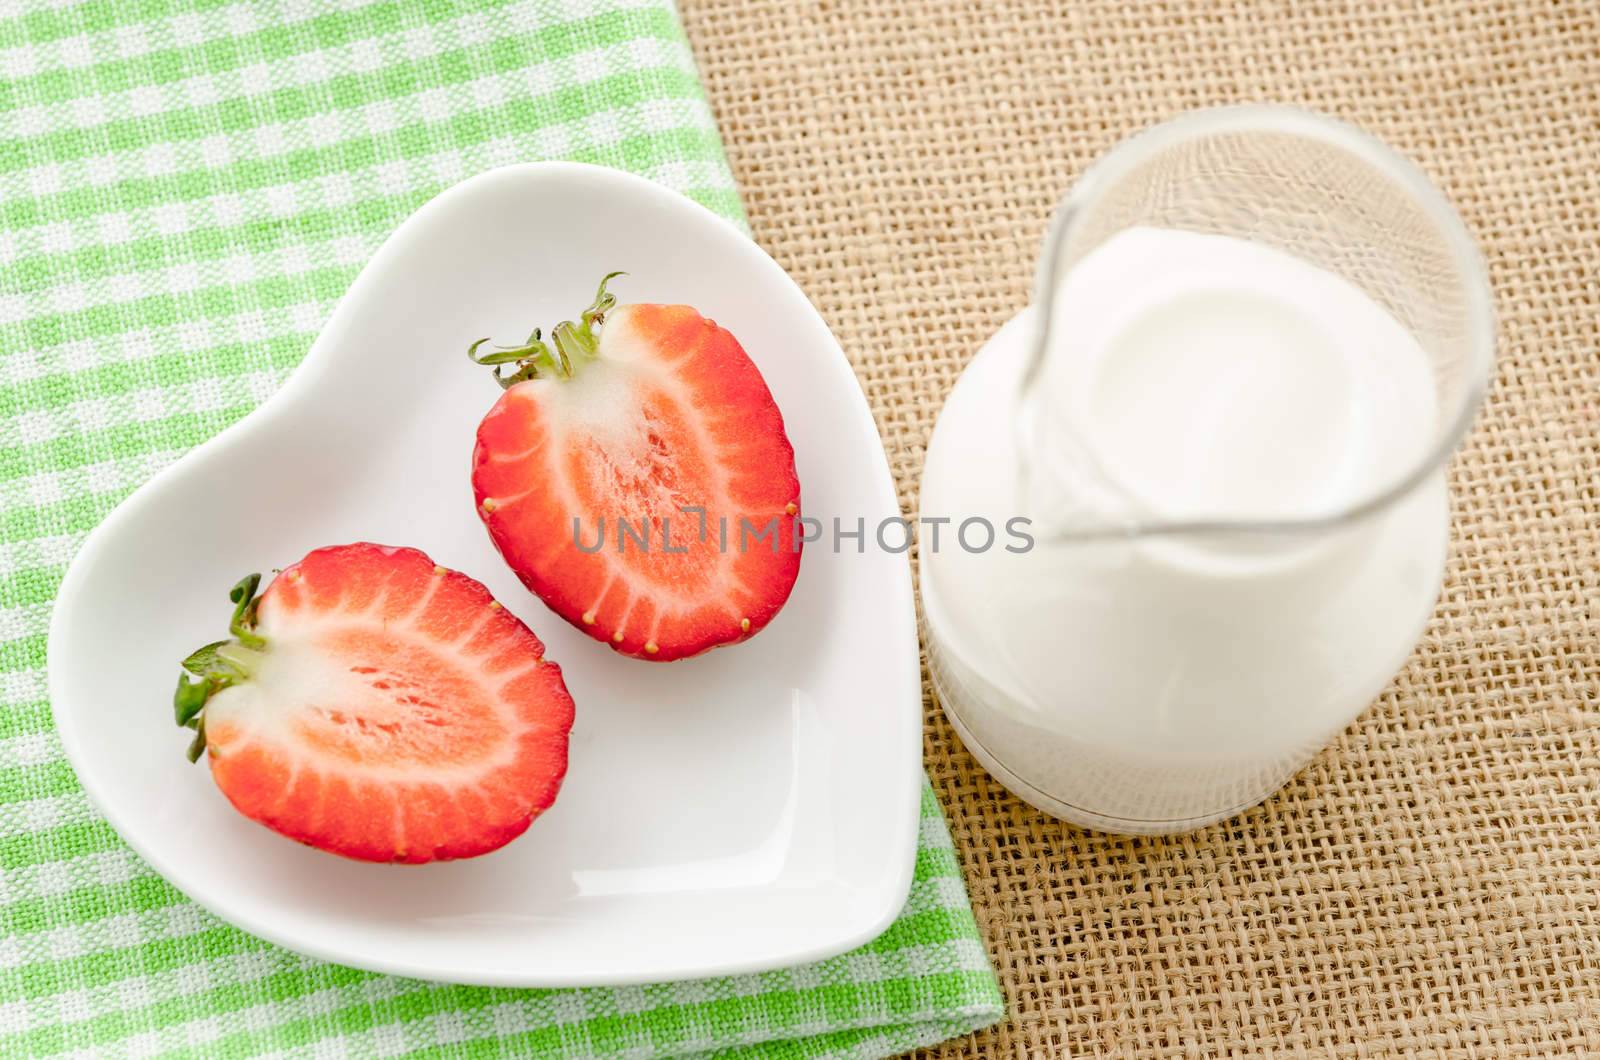 Strawberries and milk drink in glass on tablecloth and sack background.